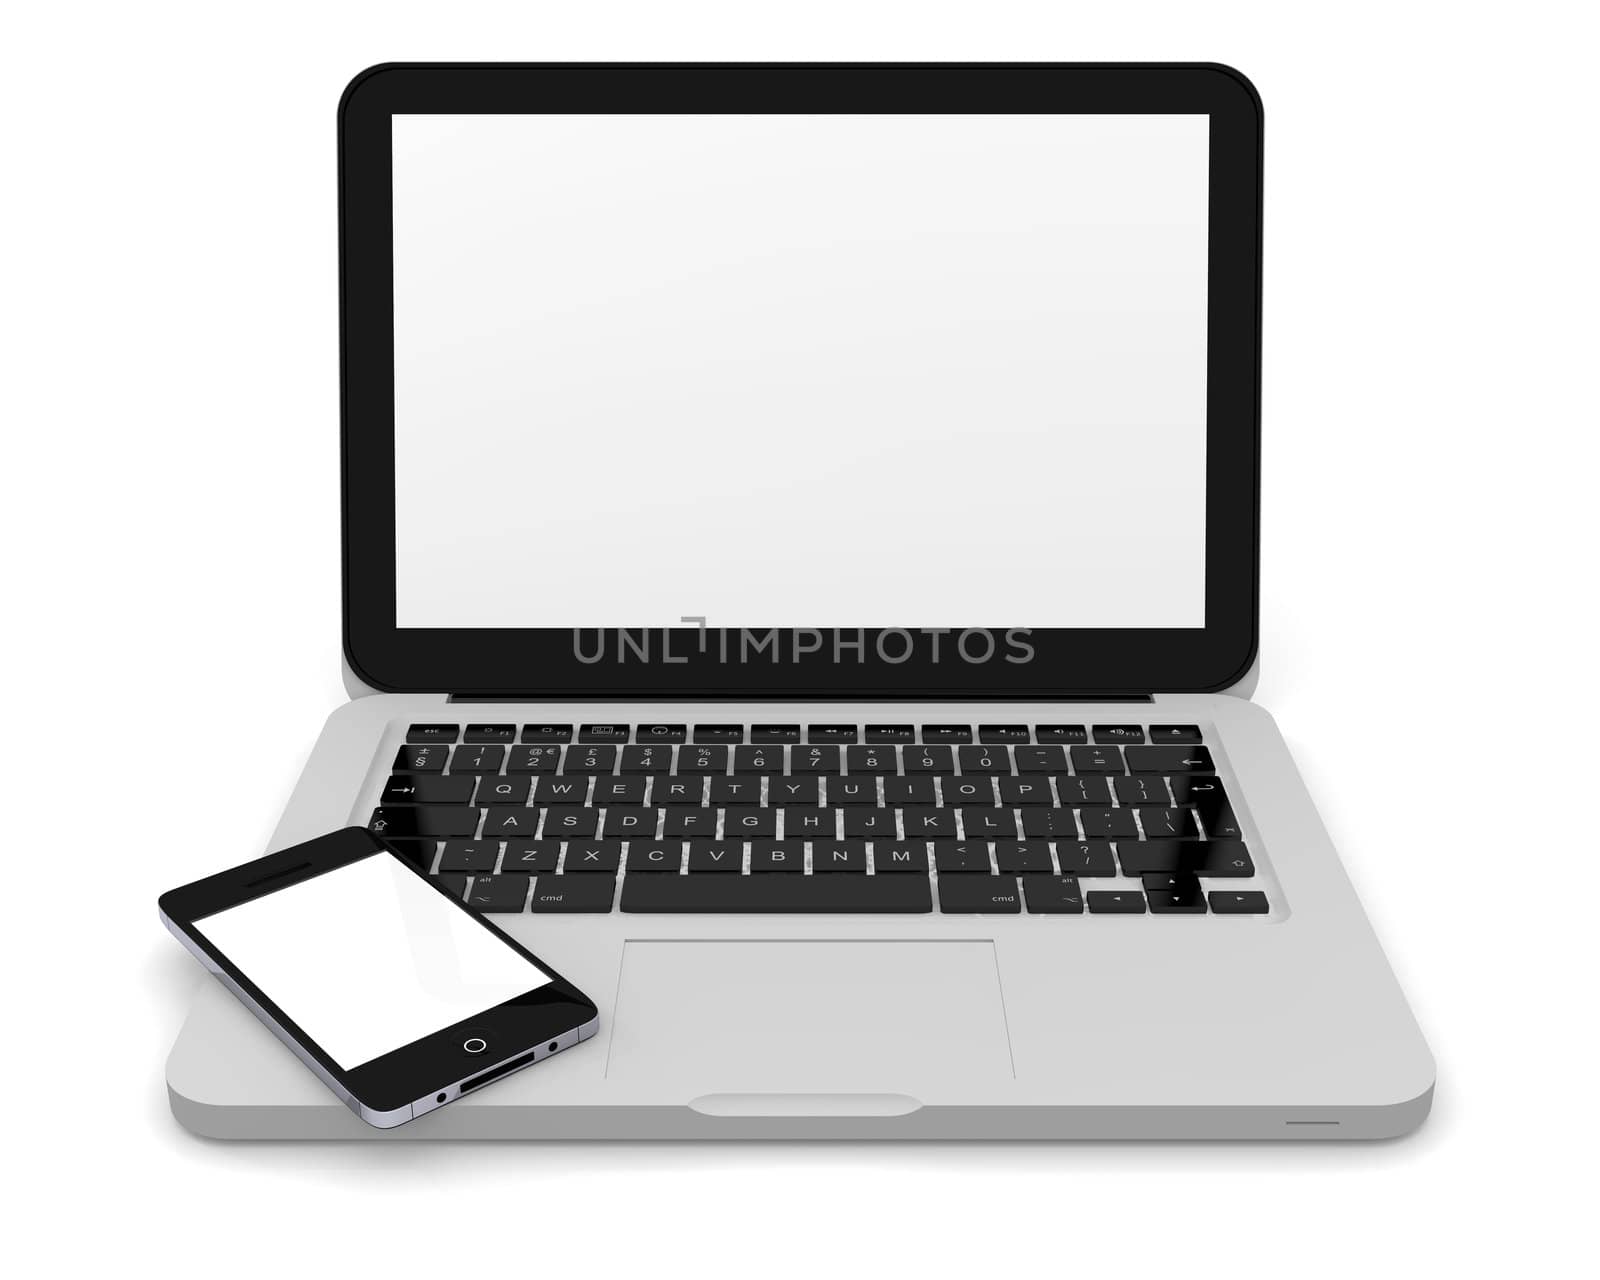 Smartphone on the top of laptop, both with blank screens, on white background